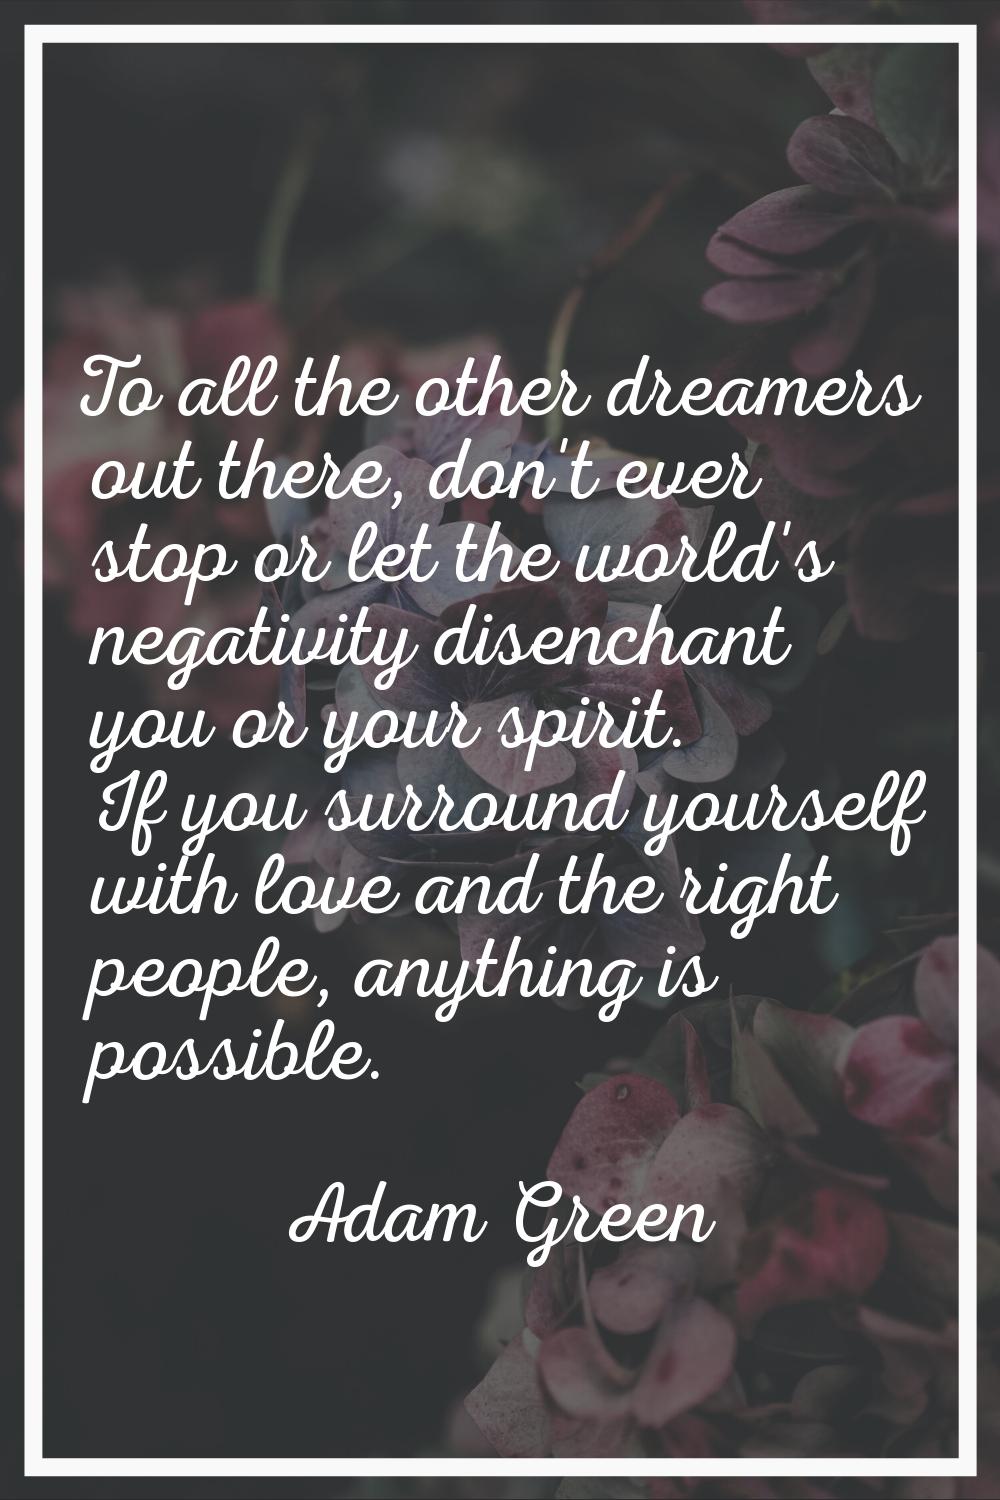 To all the other dreamers out there, don't ever stop or let the world's negativity disenchant you o